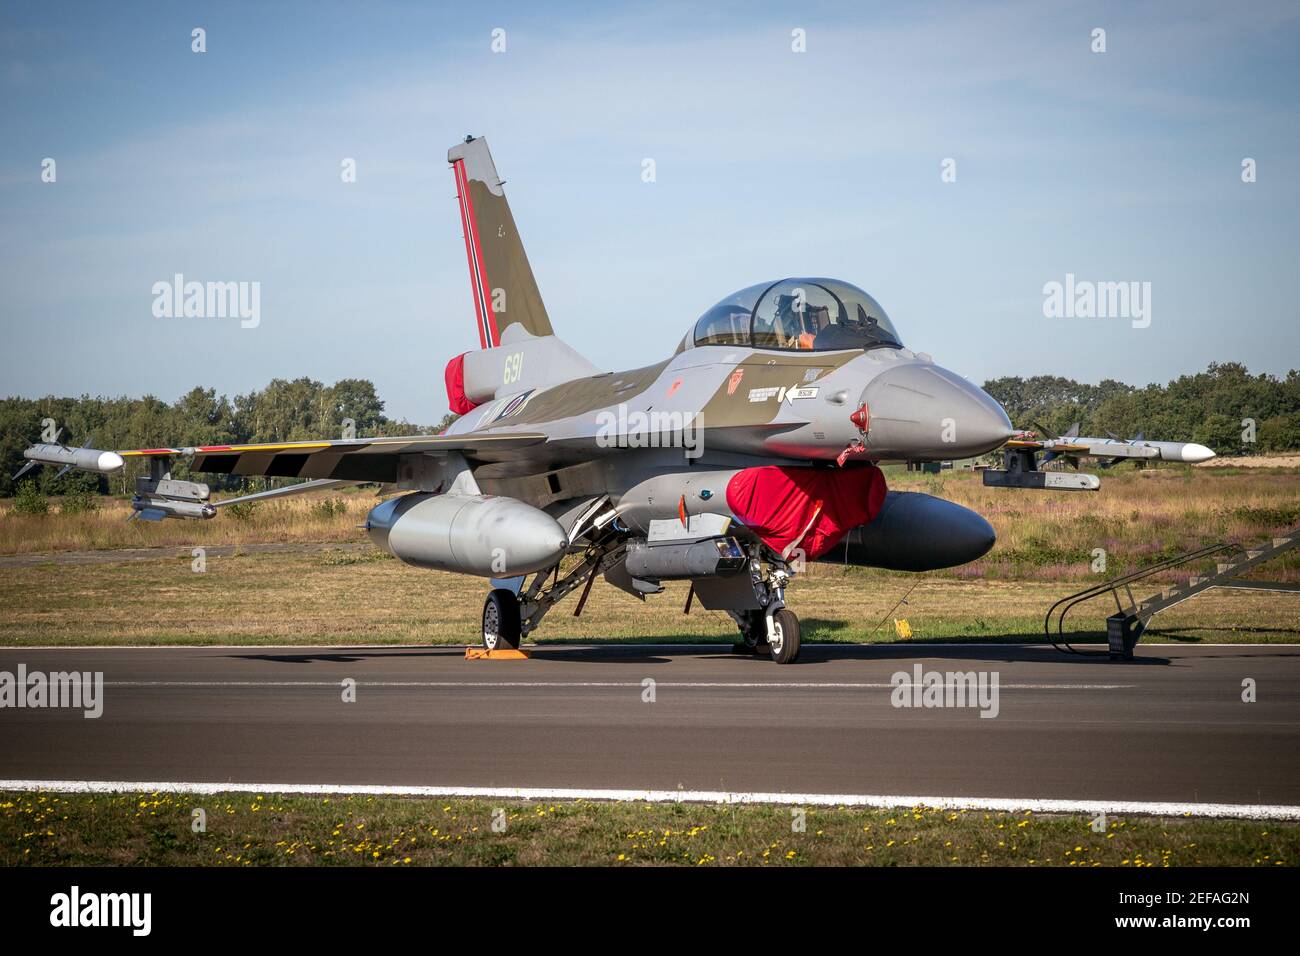 Royal Norwegian Air Force F-16 fighter aircraft in the colors of a World War 2 Spitfire fighter aircraft on the tarmac of Kleine-Brogel Airbase. Belgi Stock Photo